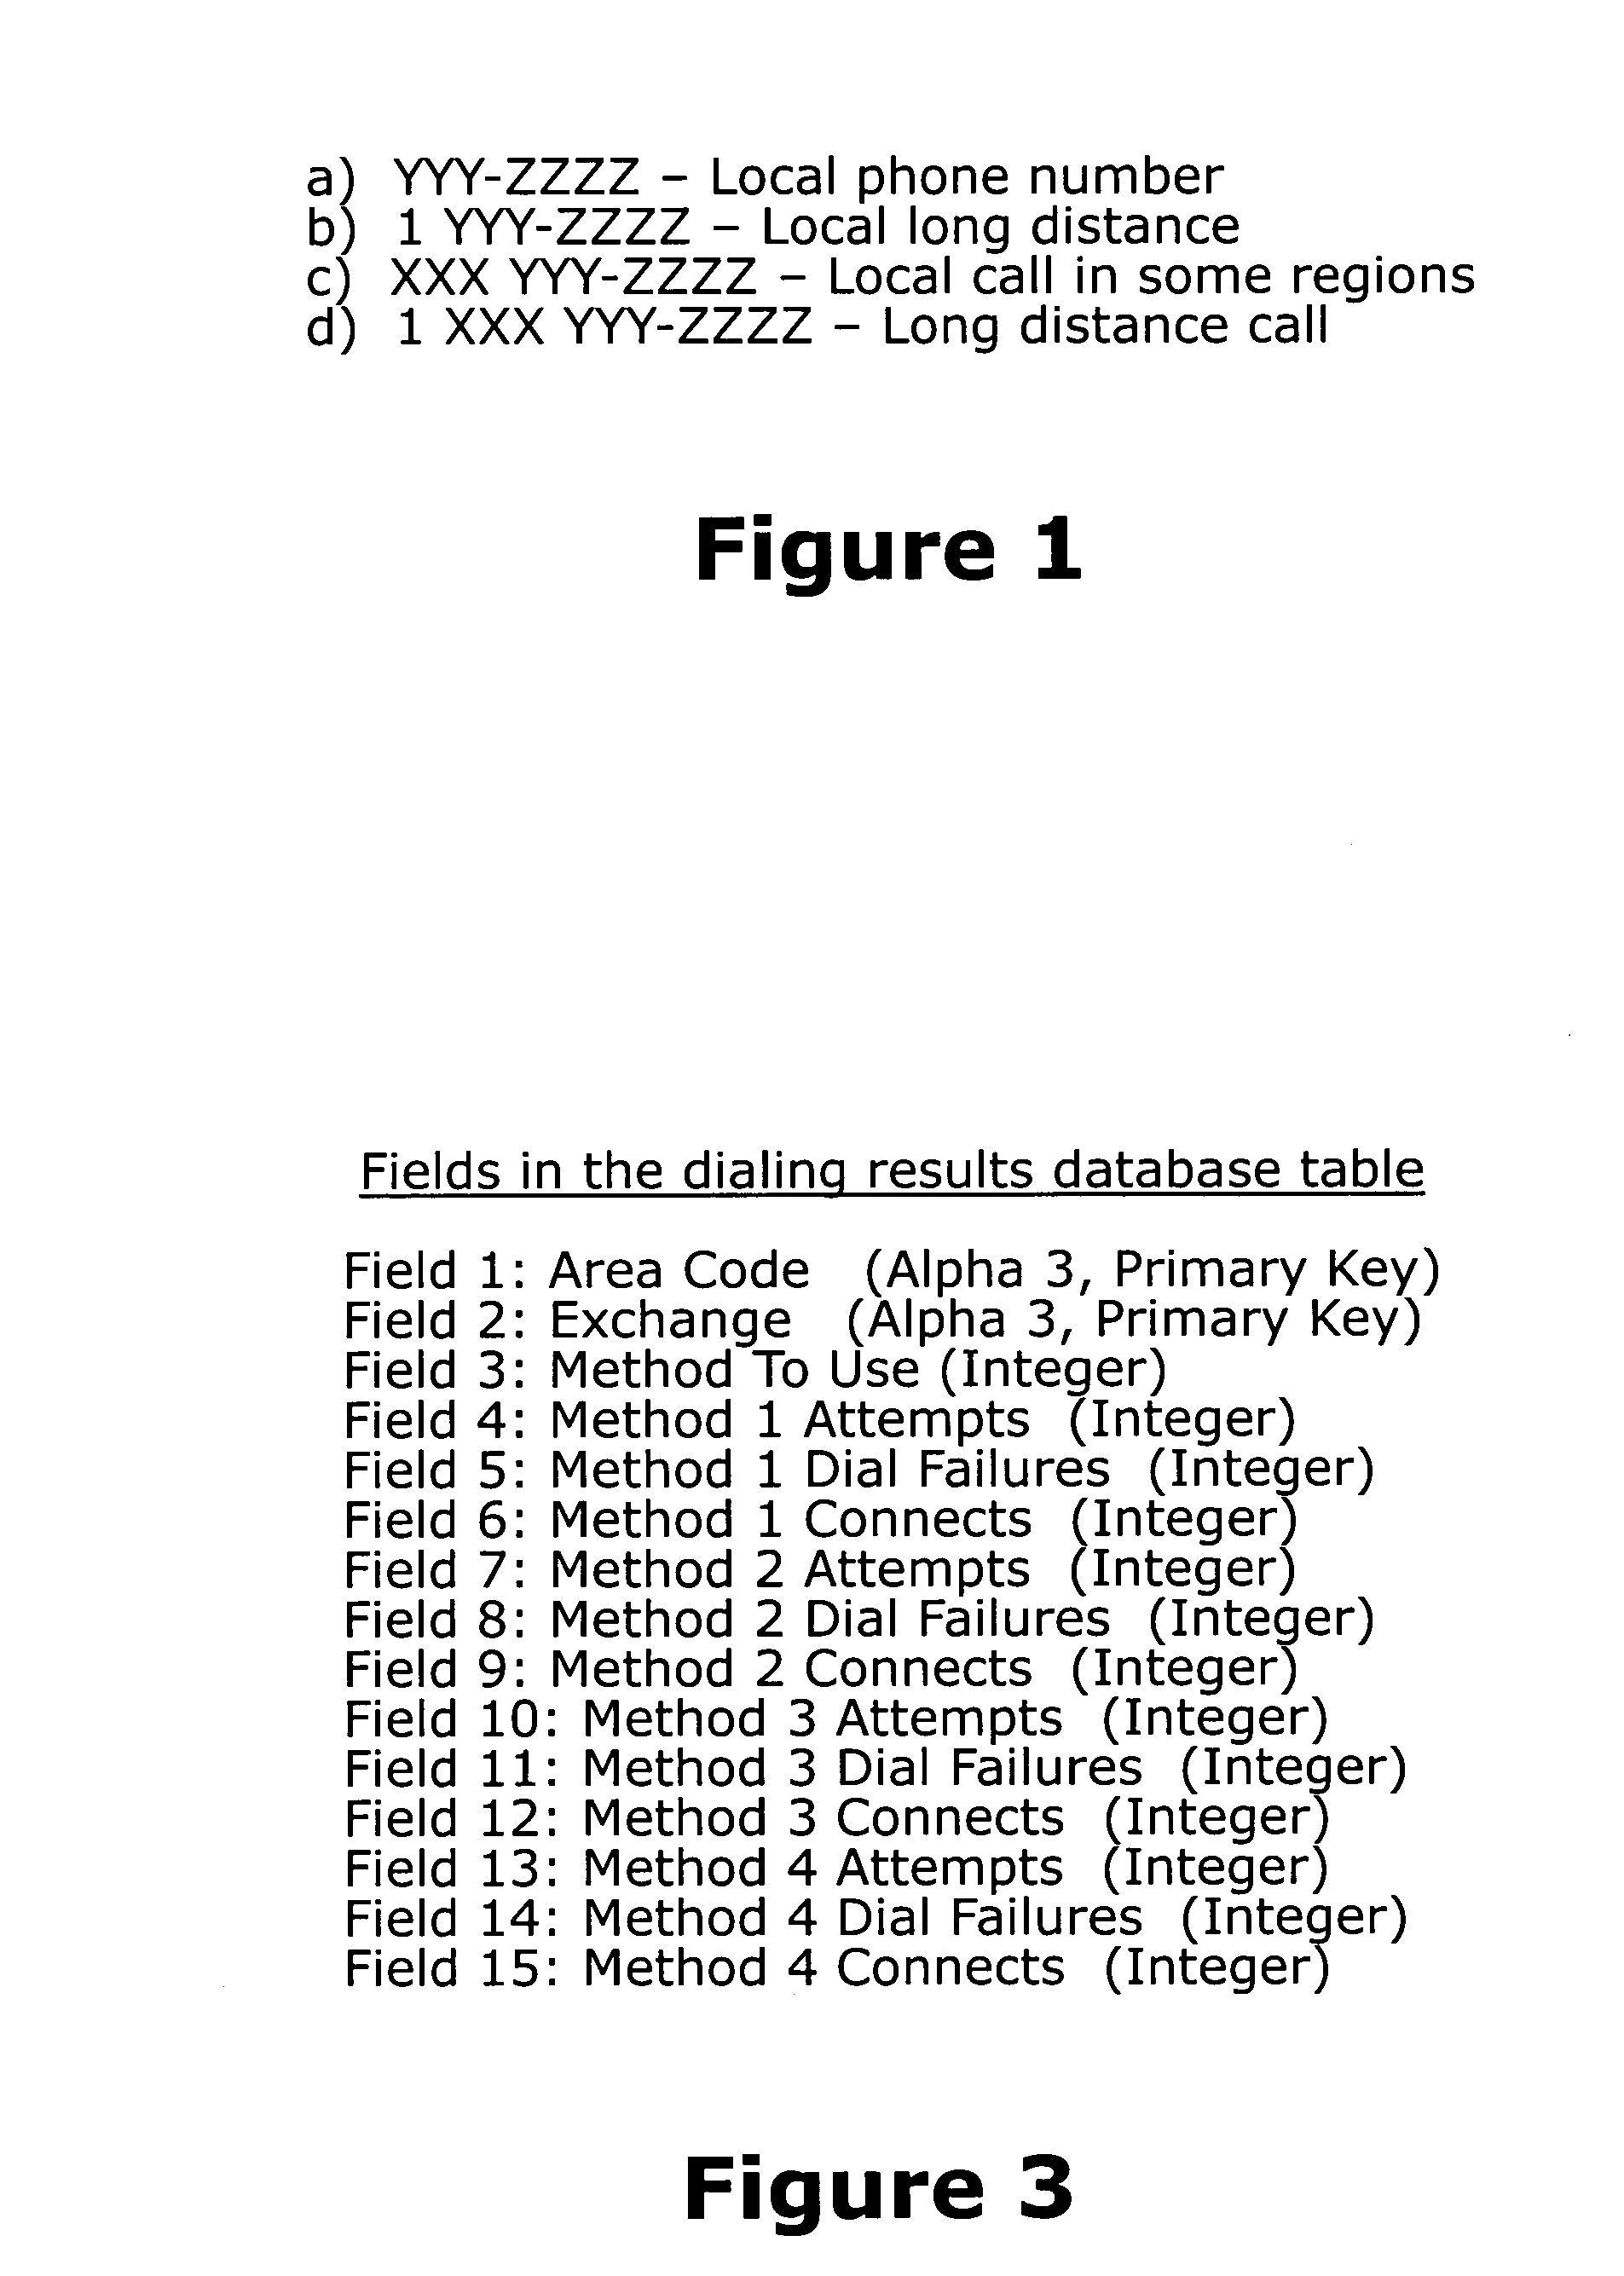 Automatic determination of dialing methods for stored uniformly formatted phone numbers